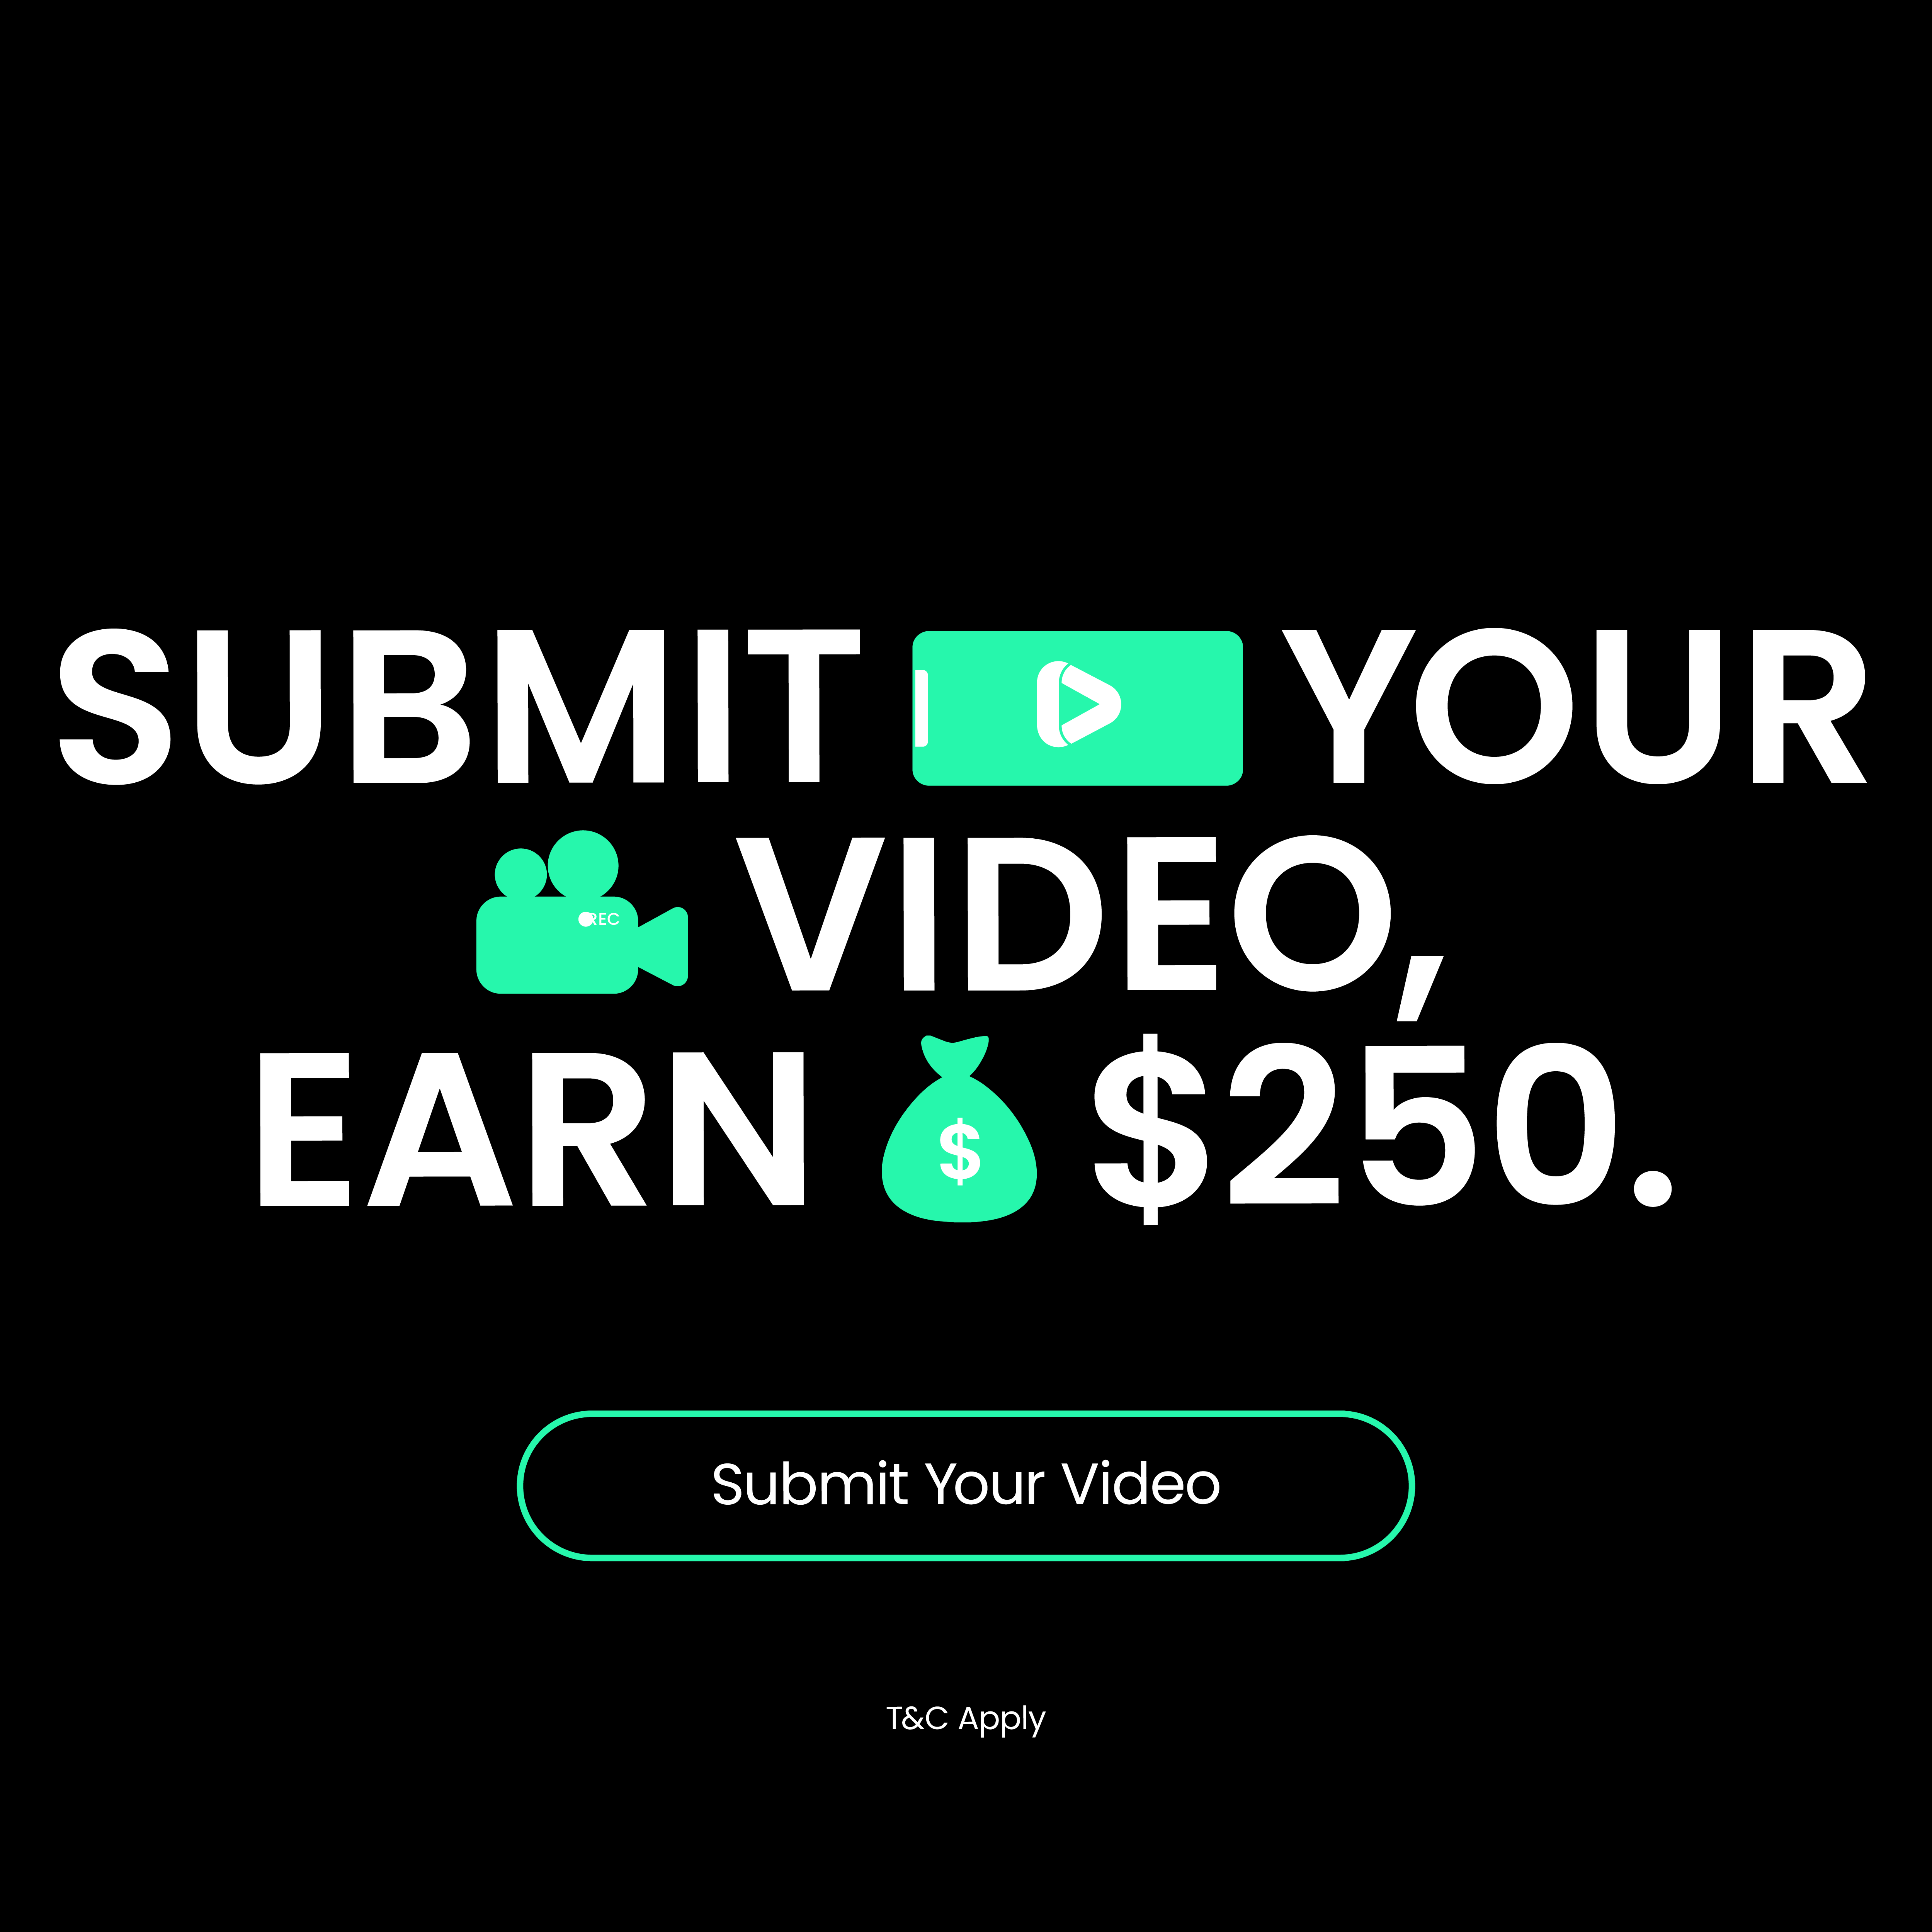 Submit your video, earn $250.